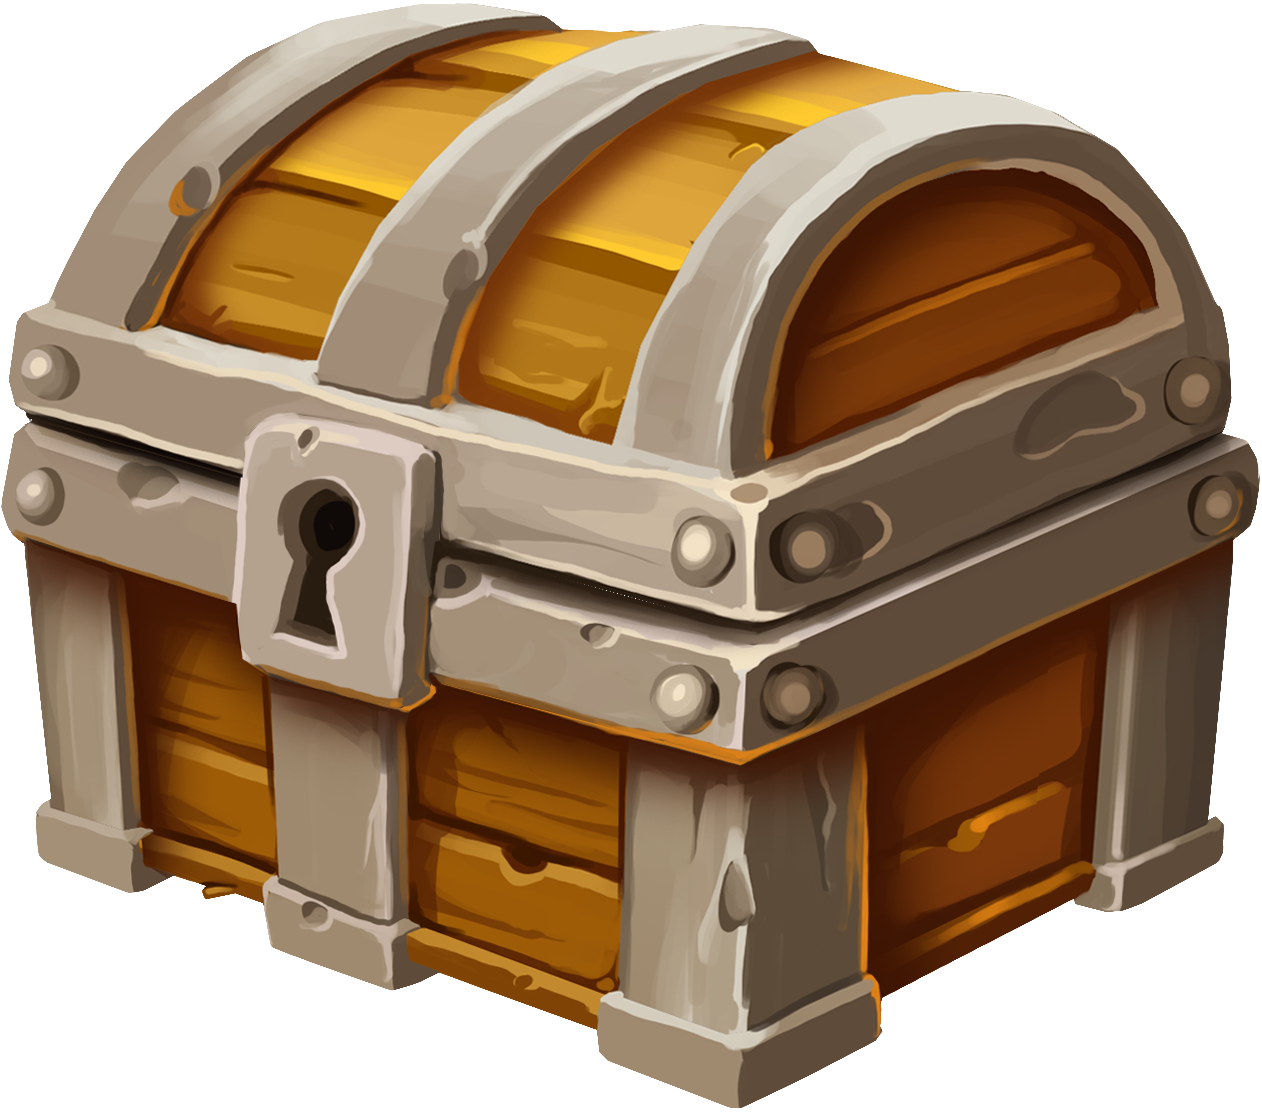 https://www.pngall.com/wp-content/uploads/2/Closed-Treasure-Chest-PNG-Clipart